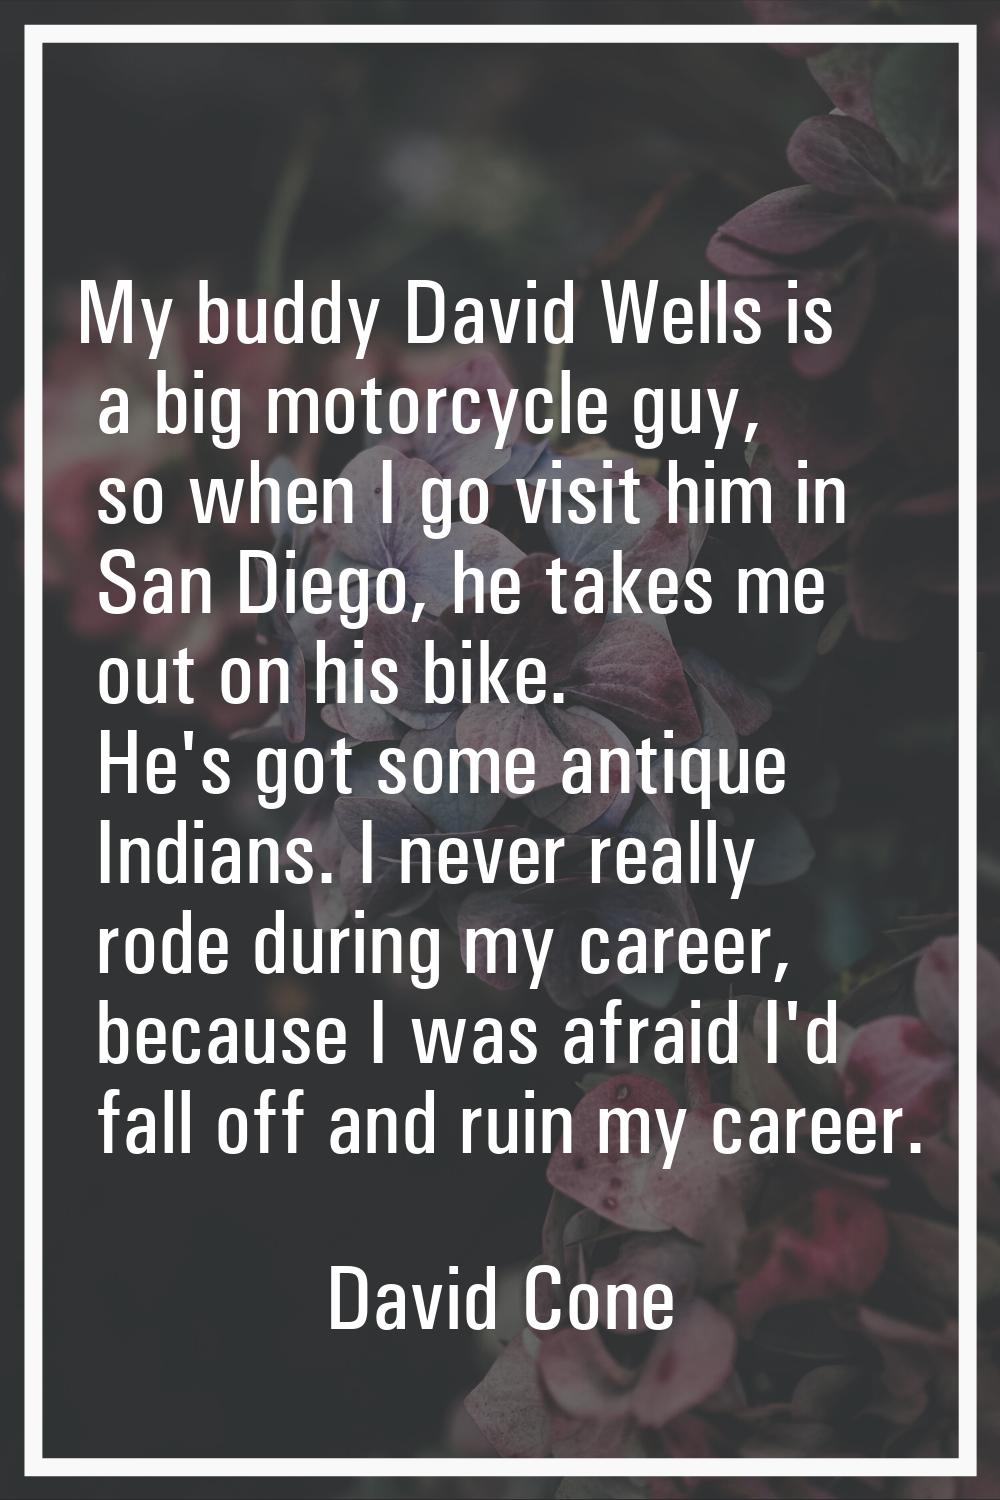 My buddy David Wells is a big motorcycle guy, so when I go visit him in San Diego, he takes me out 